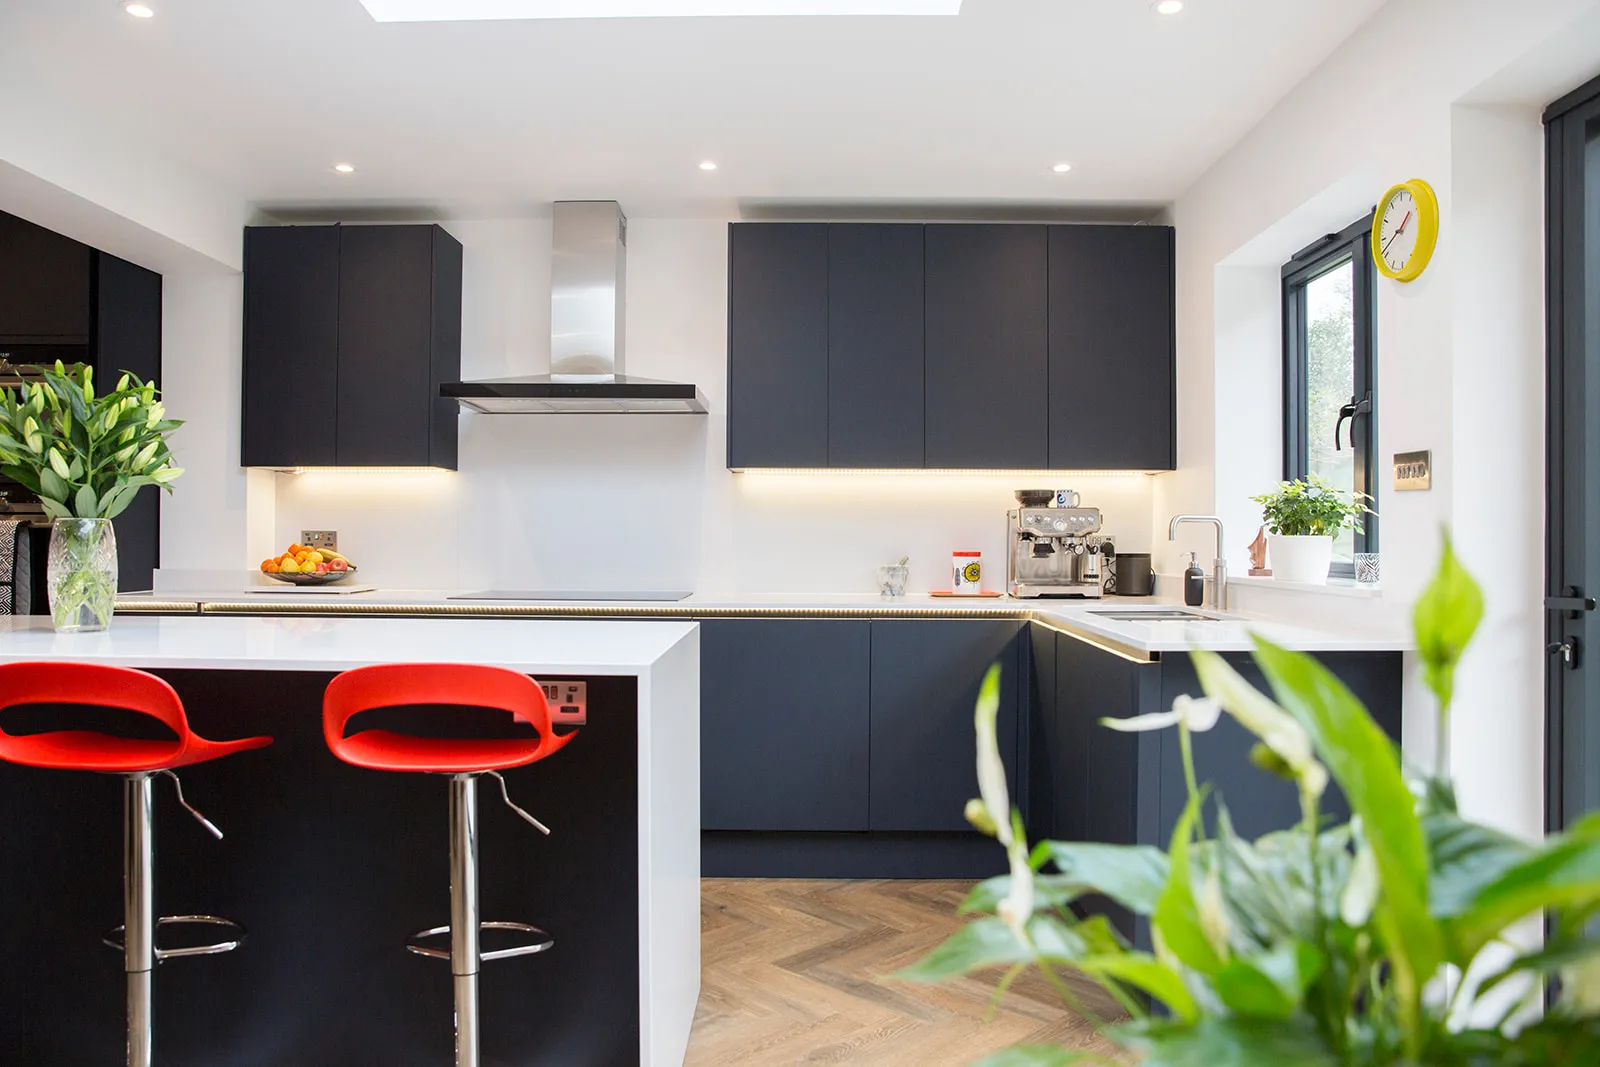 A modern kitchen with black cabinets and red stools.